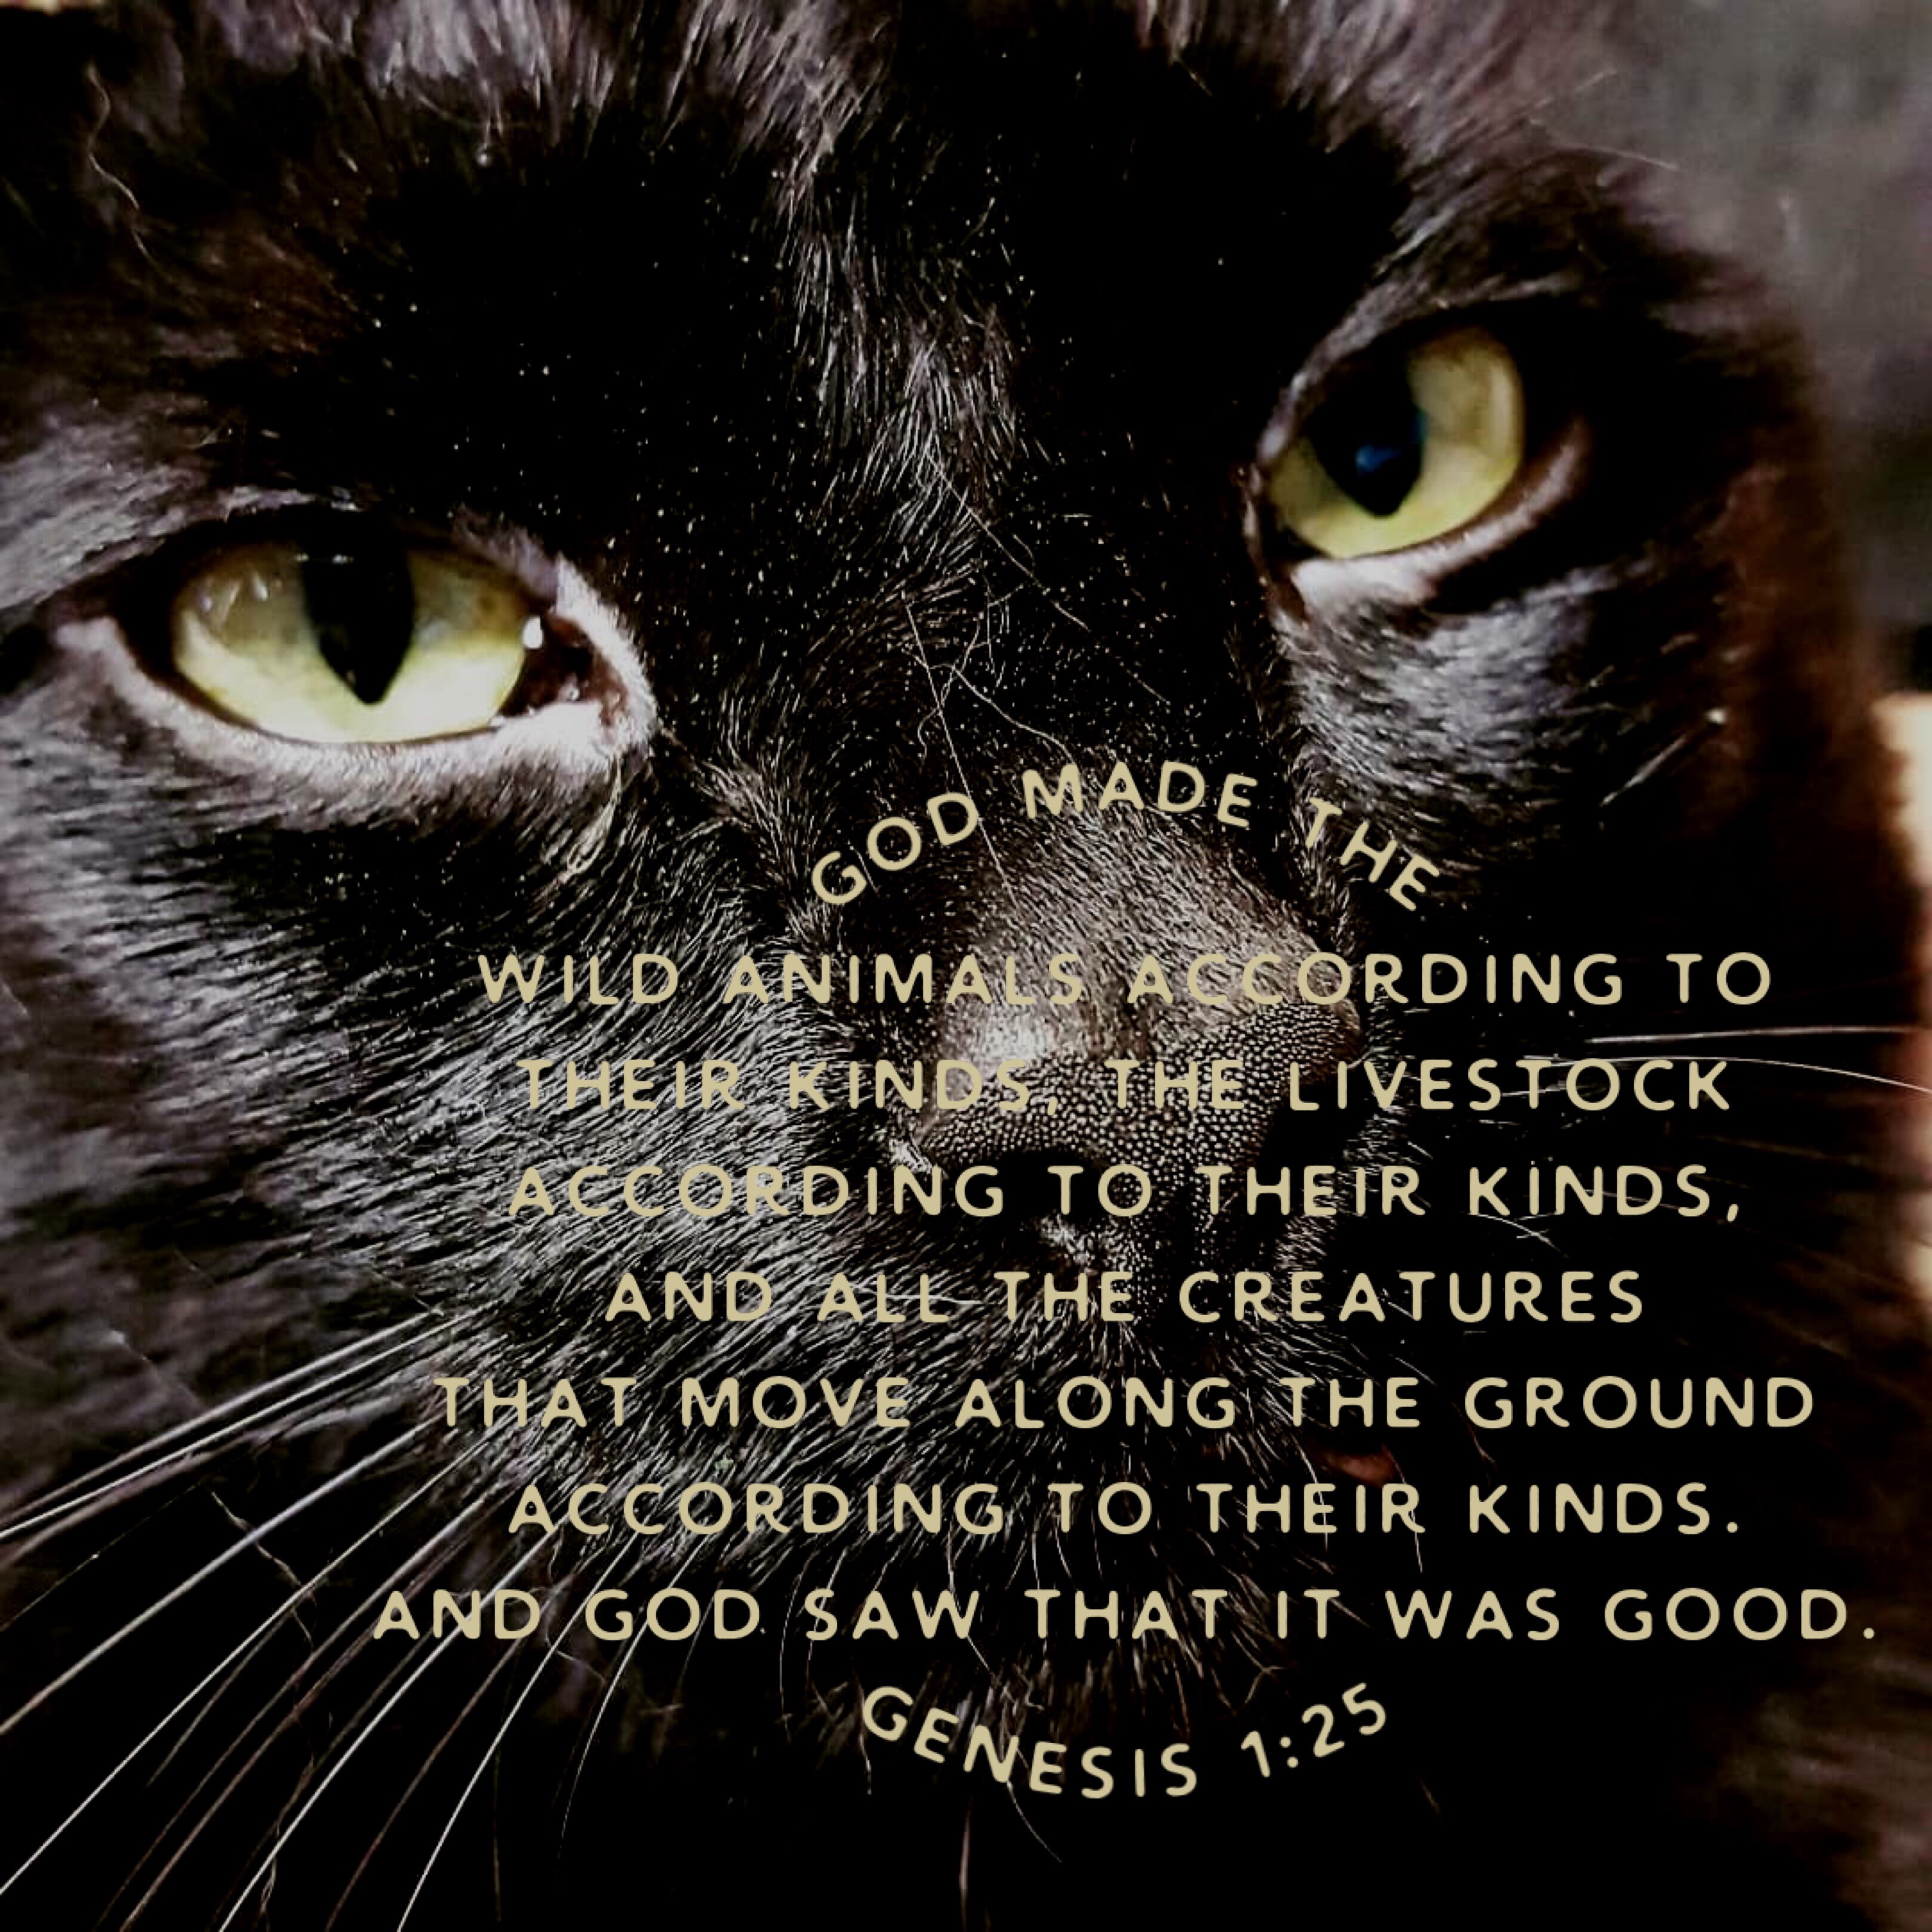 Joel the Brave from 2 Cats and a Blog - God made the wild animals according to their kinds, the livestock according to their kinds, and all the creatures that move along the ground according to their kinds. And God saw that it was good. Genesis 1:25